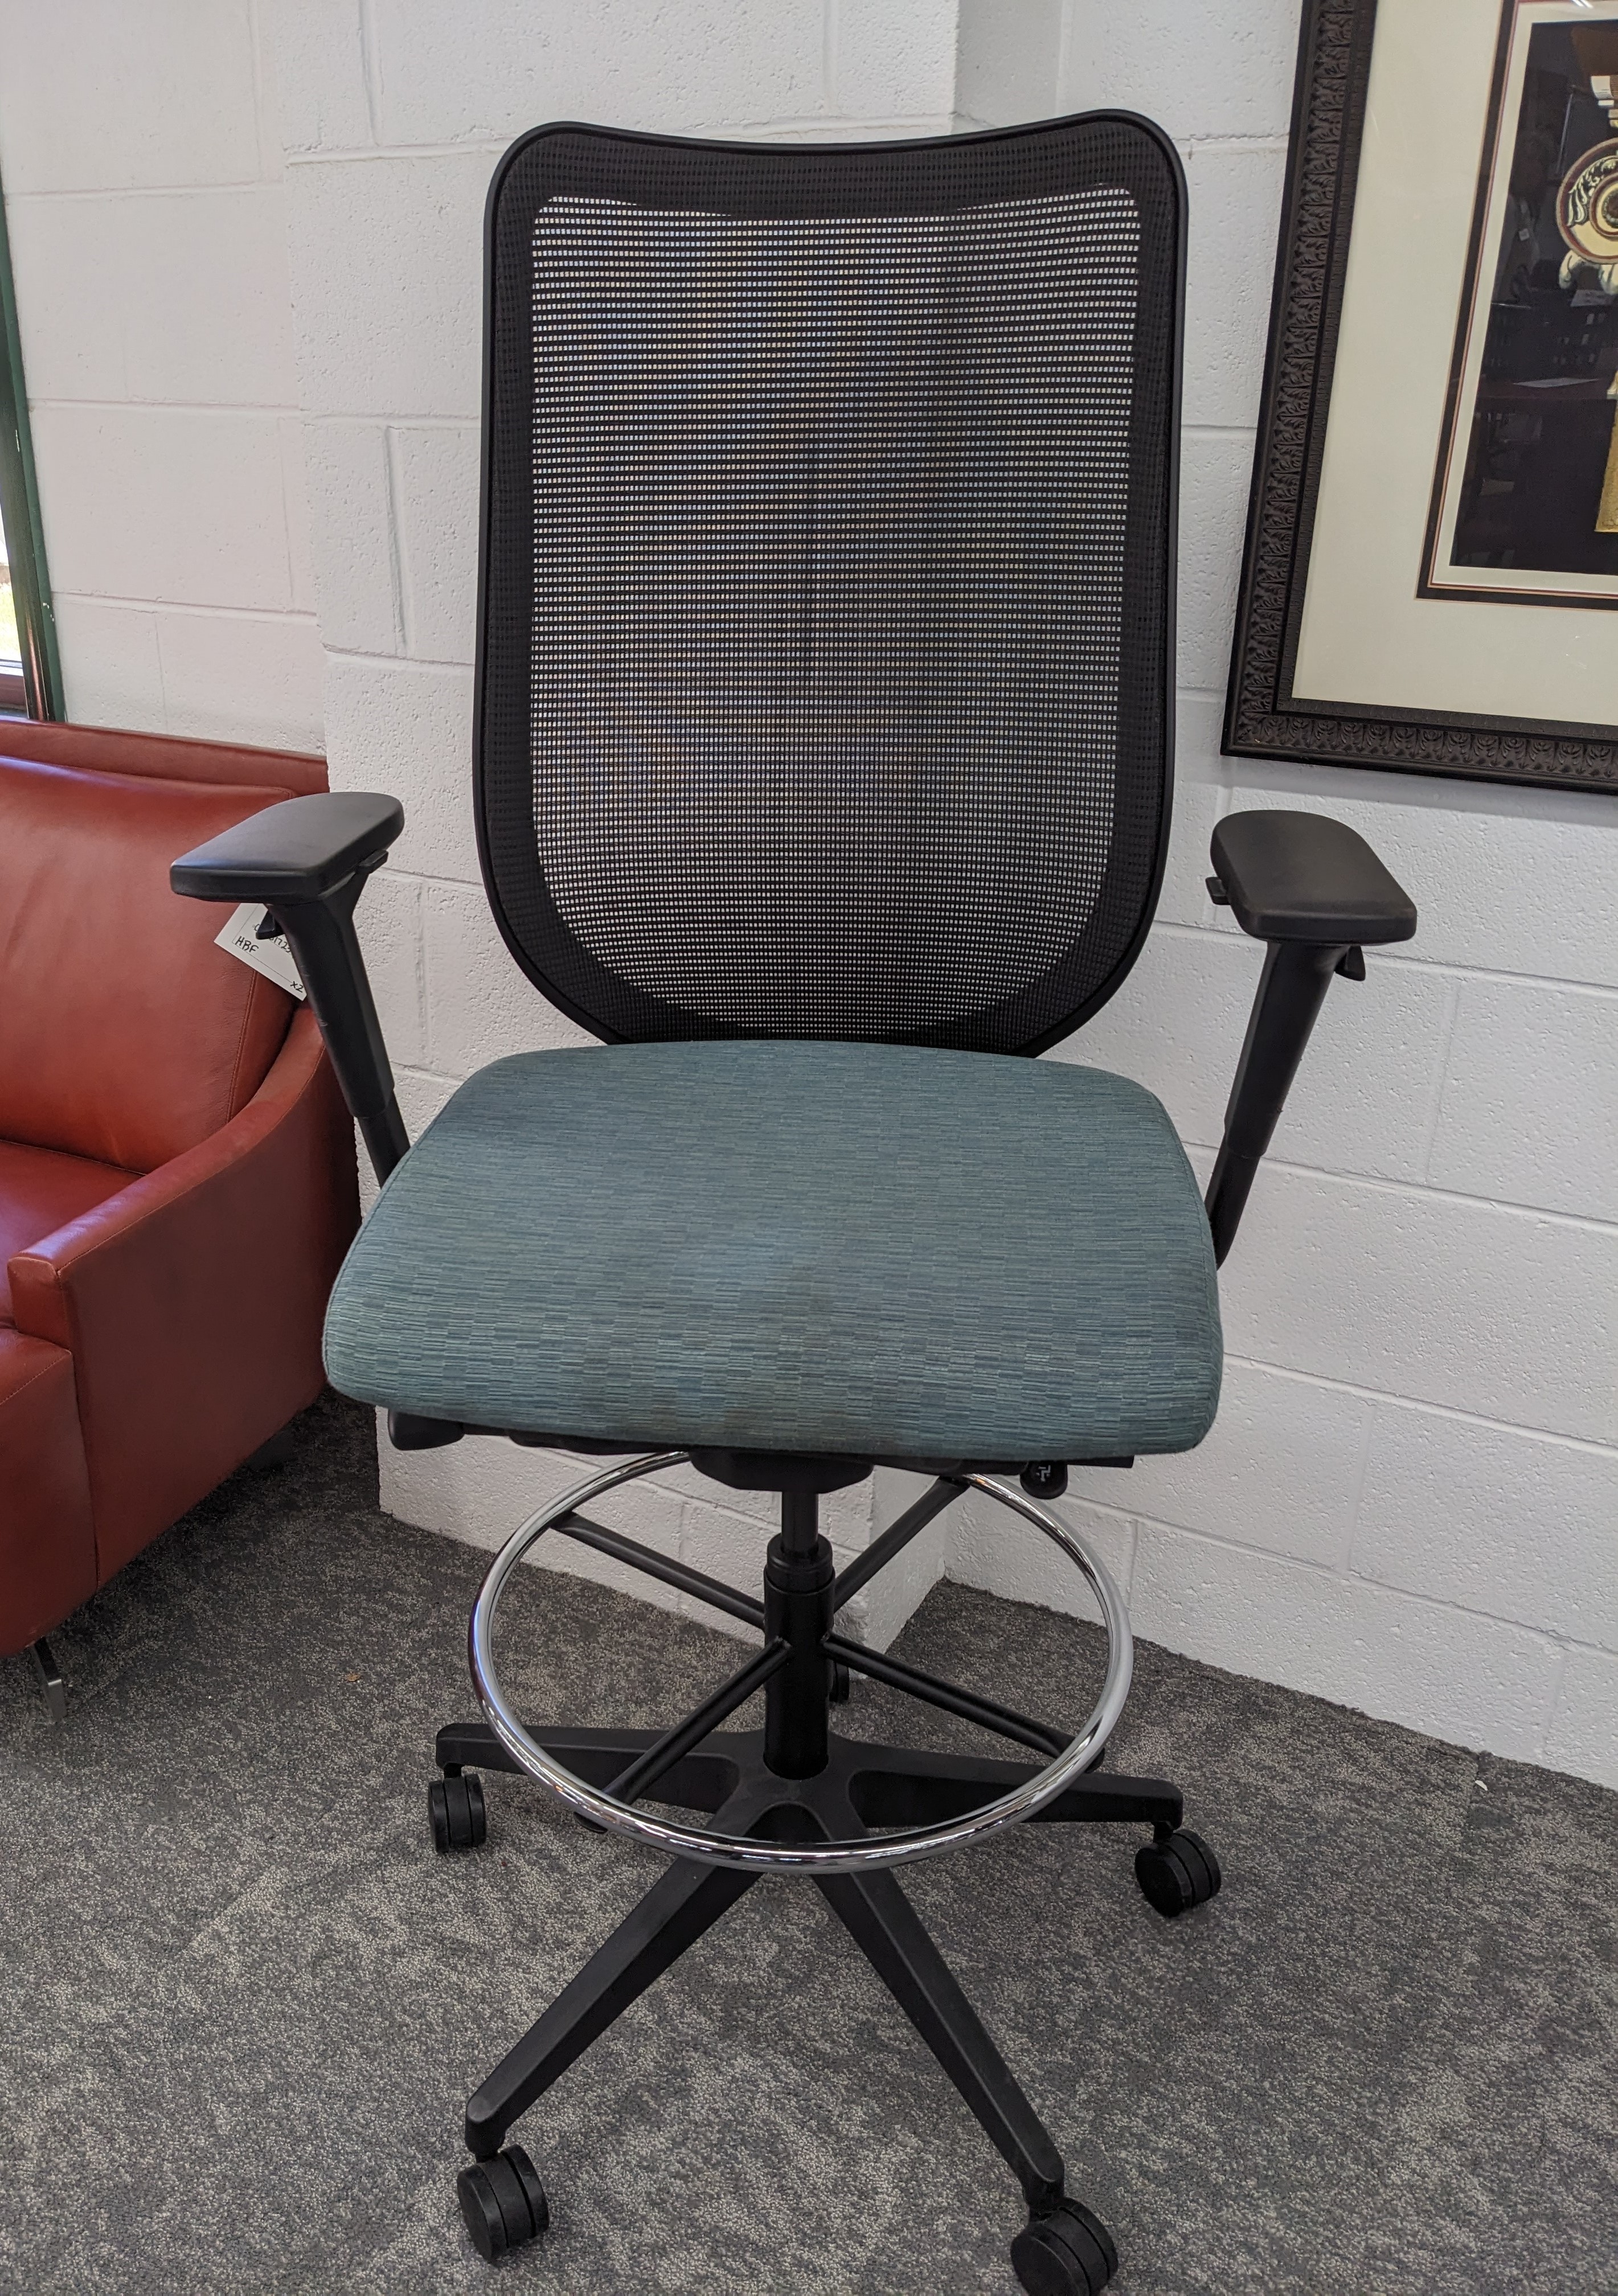 Used Drafting Stool with Mesh Back